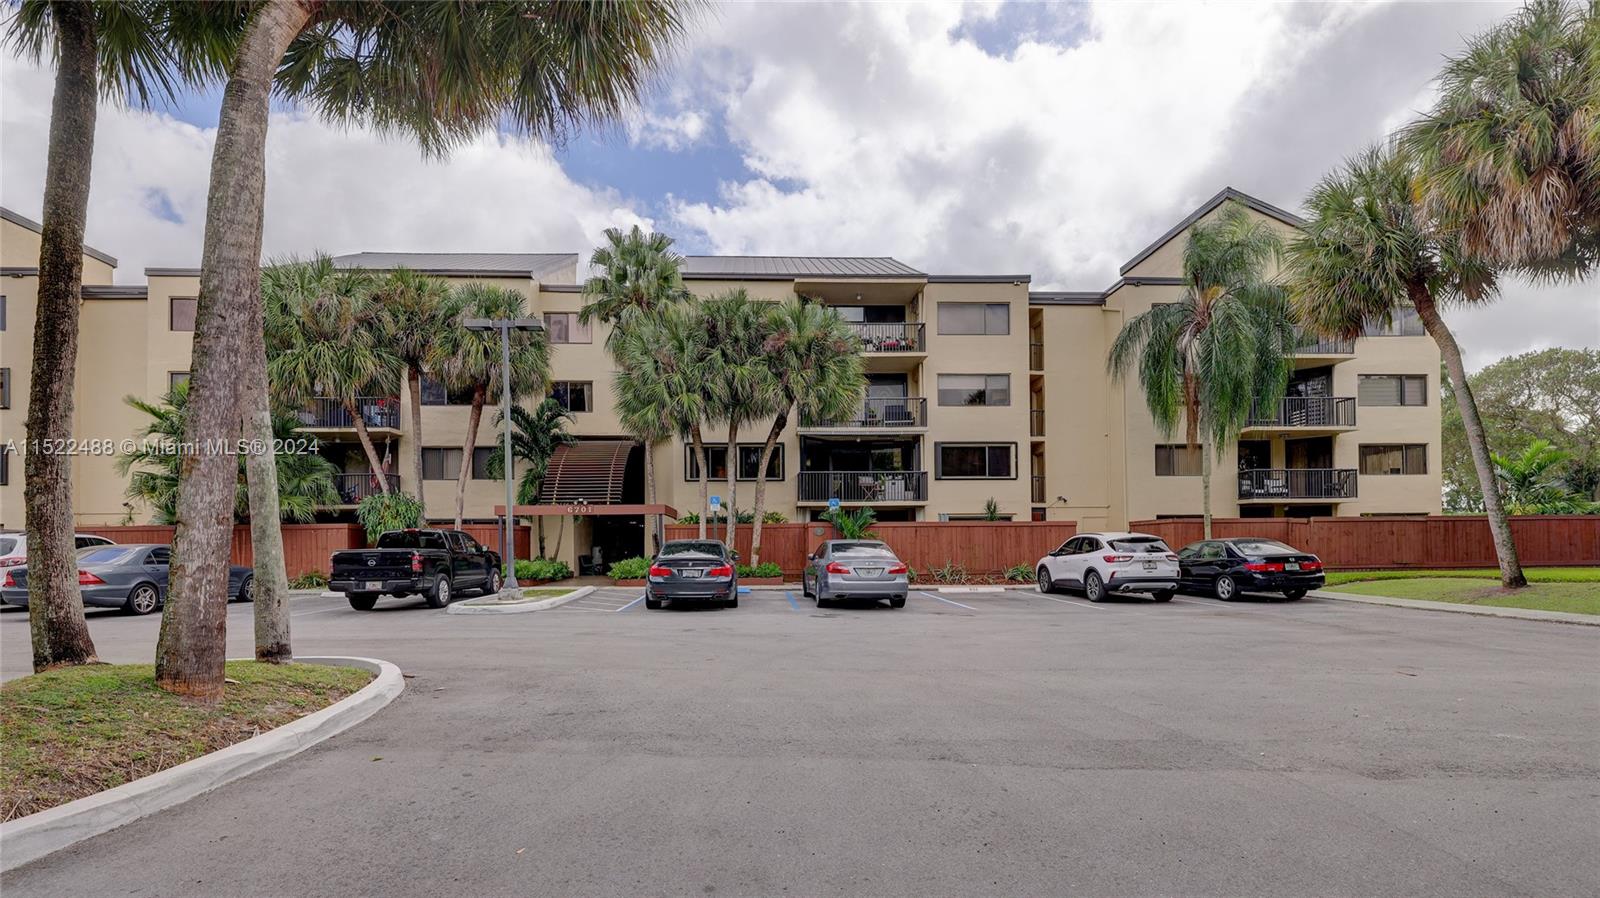 6701 SW 116th Ct #303 For Sale A11522488, FL